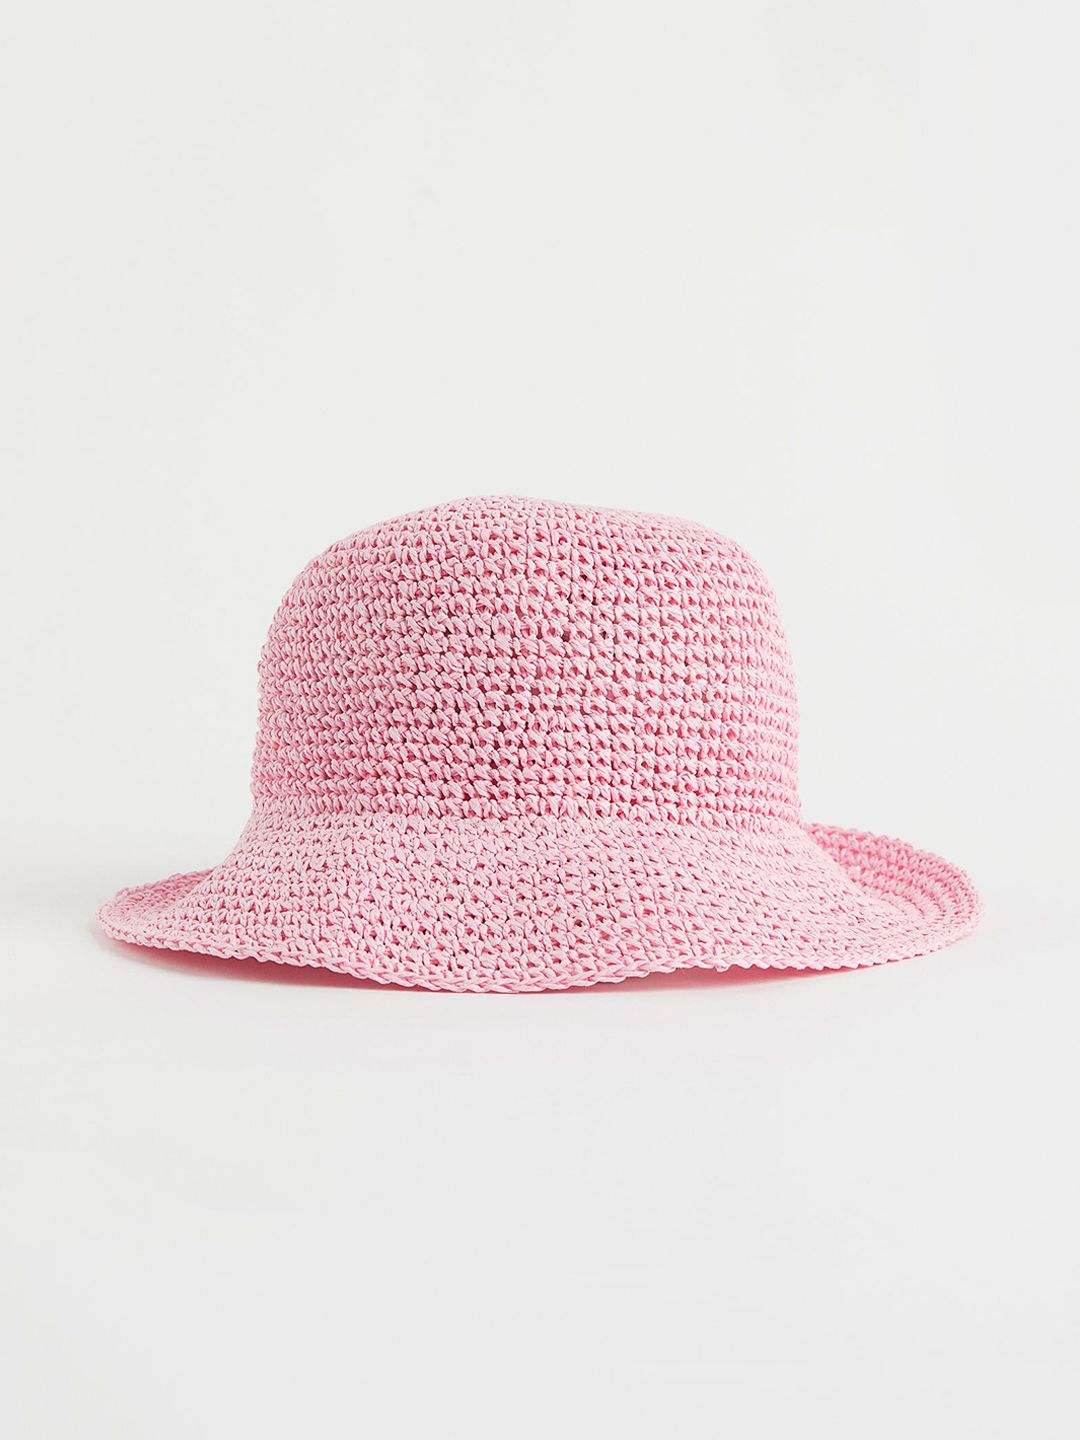 H&M Women Pink Hat Price in India